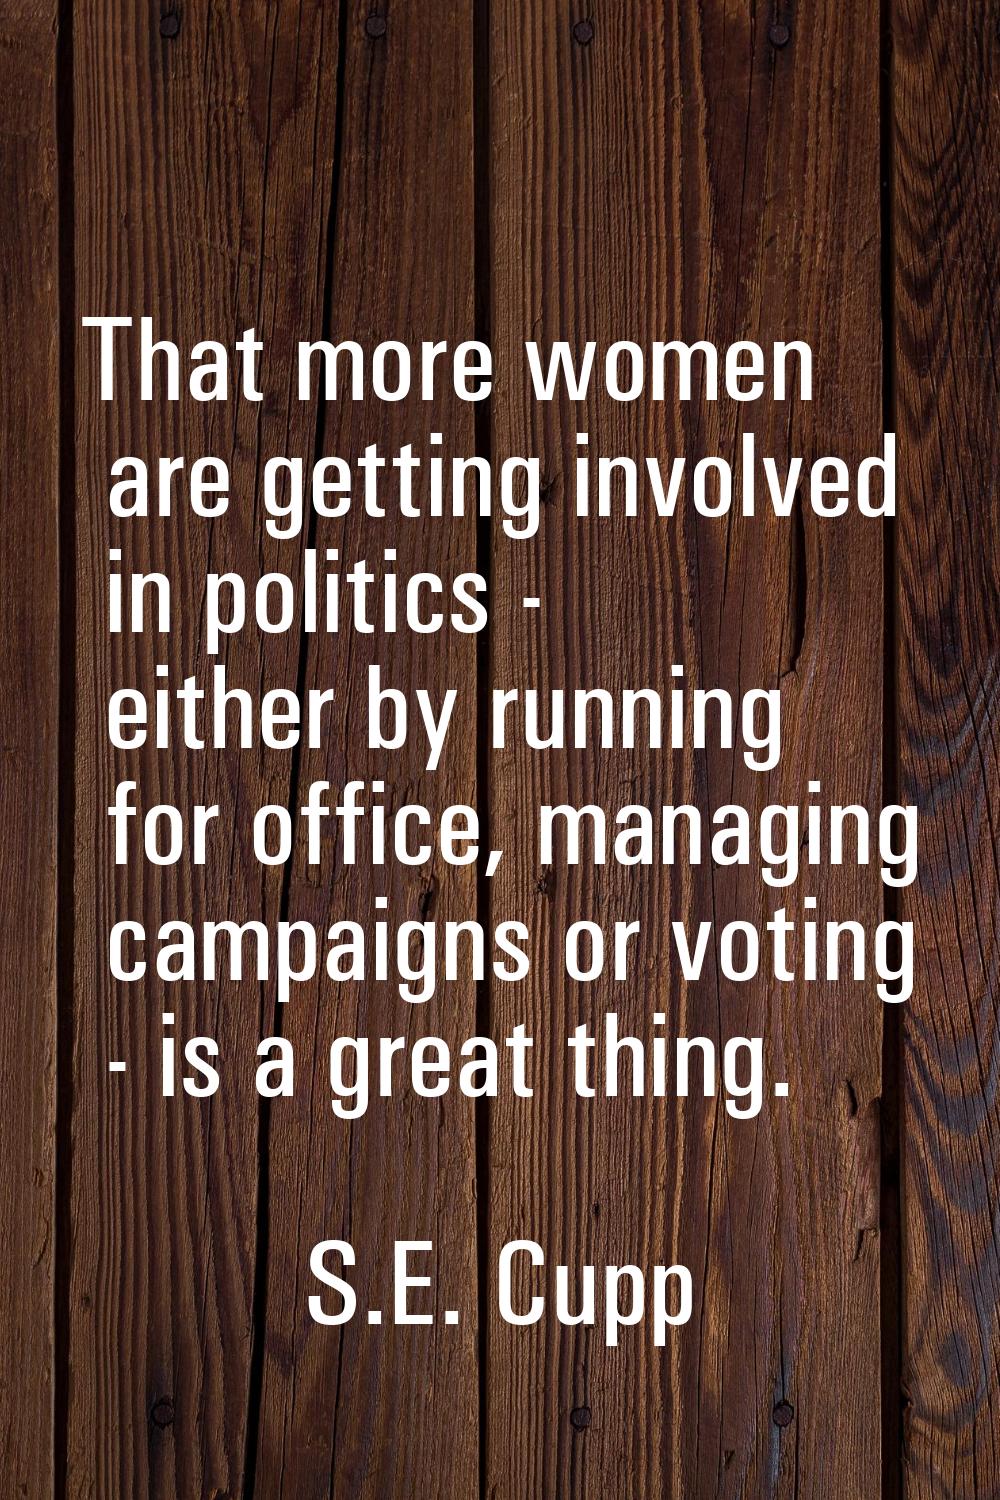 That more women are getting involved in politics - either by running for office, managing campaigns